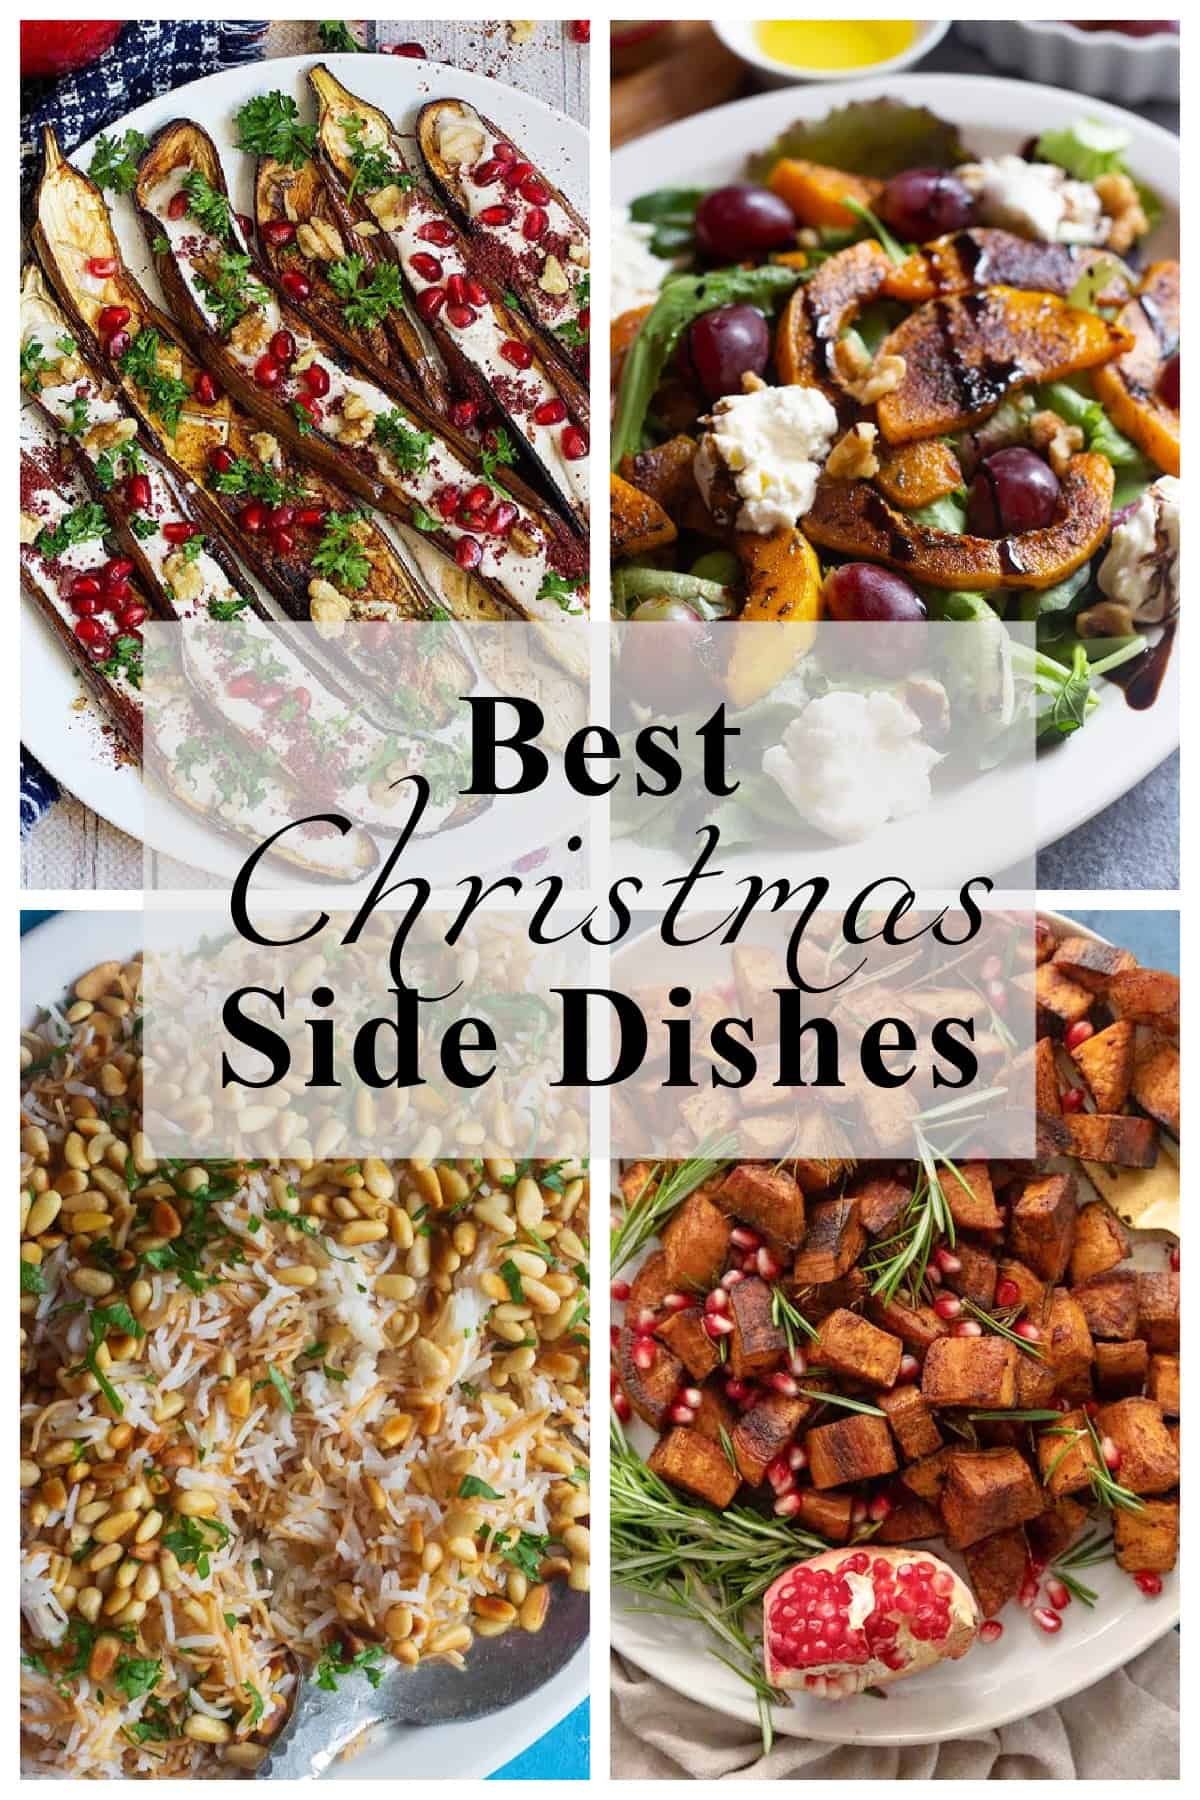 Best Christmas side dish recipes.